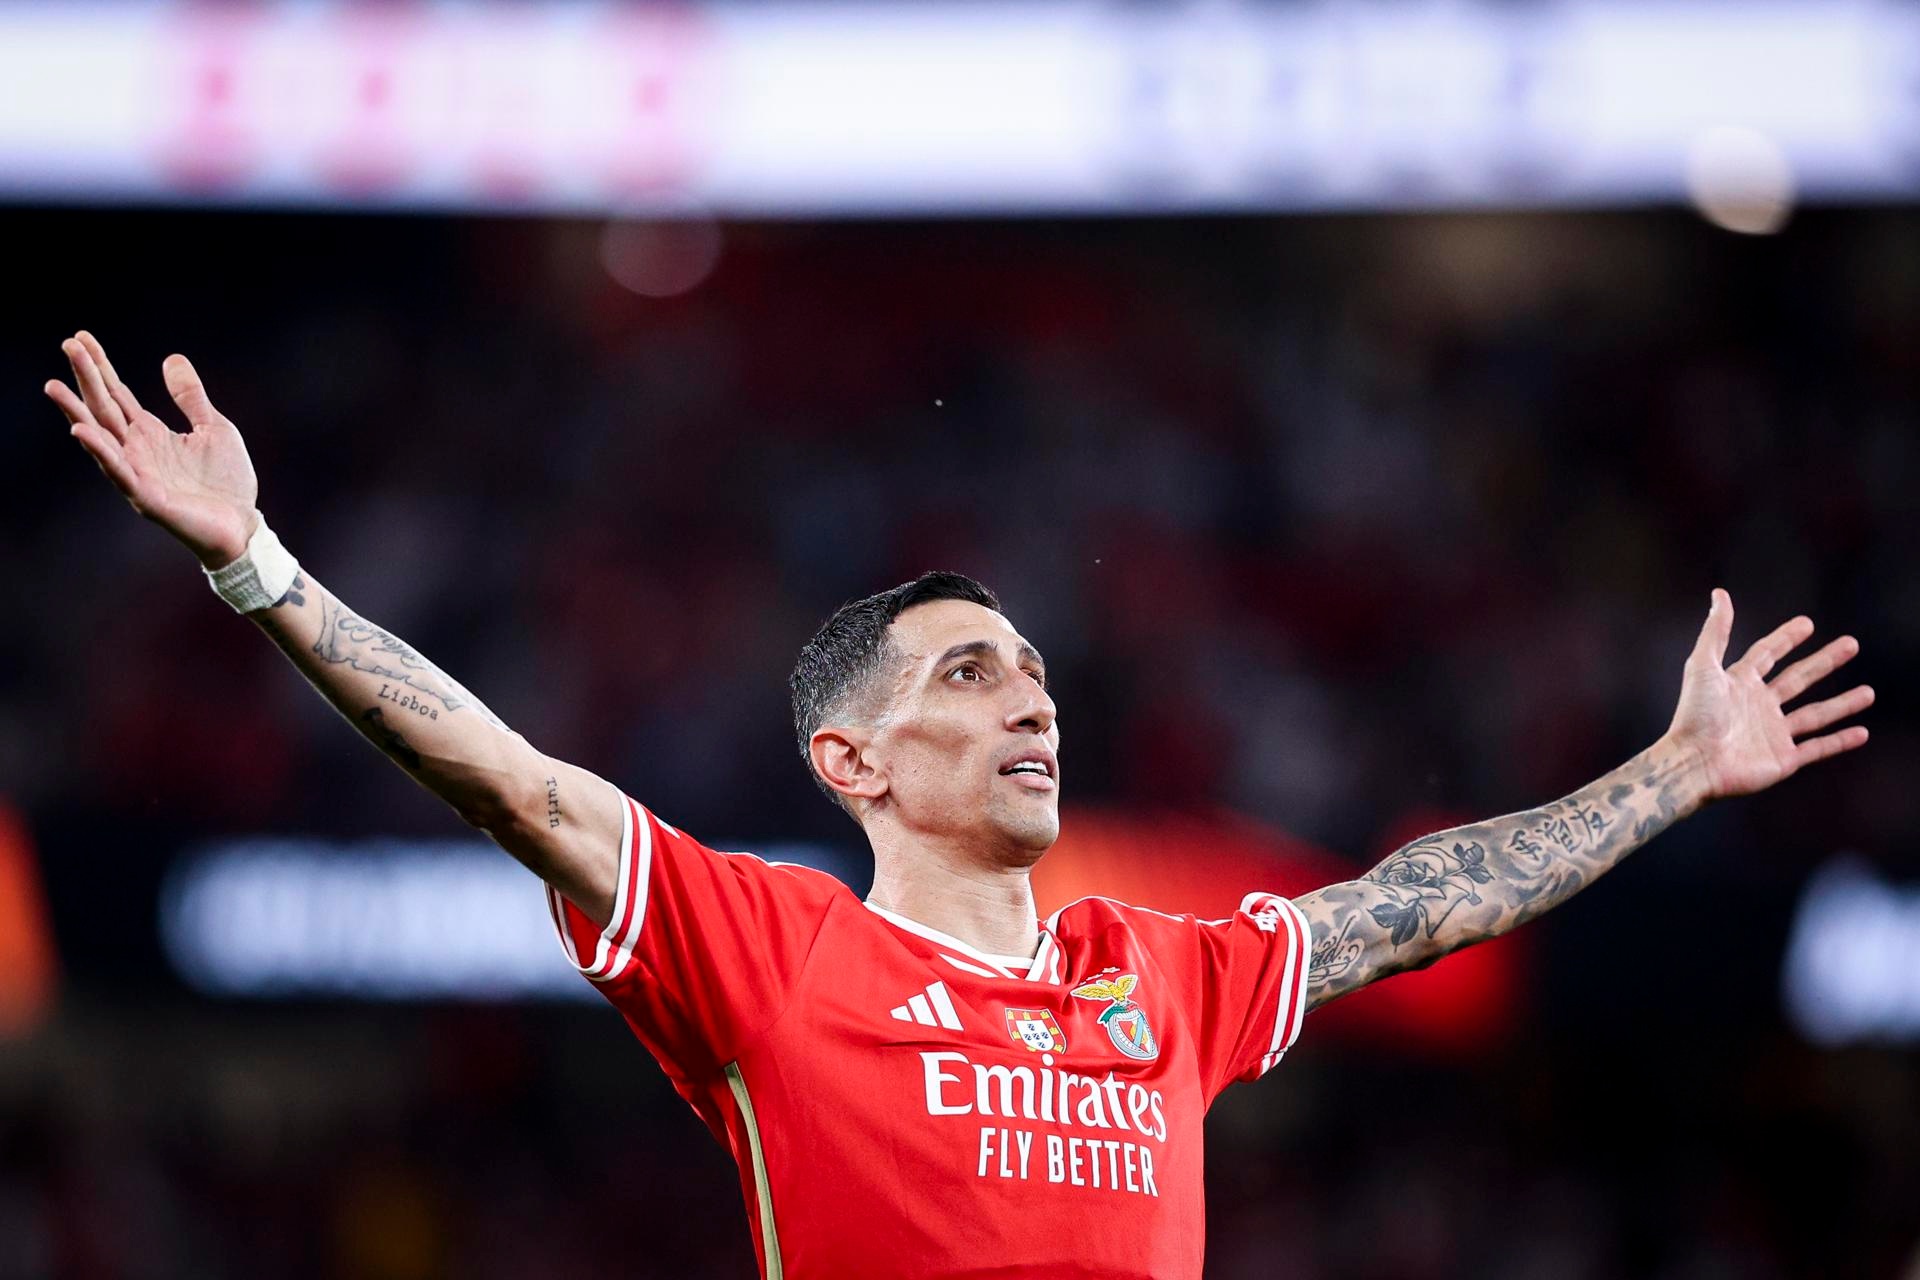 Benfica president confirmed Di Maria's continuity